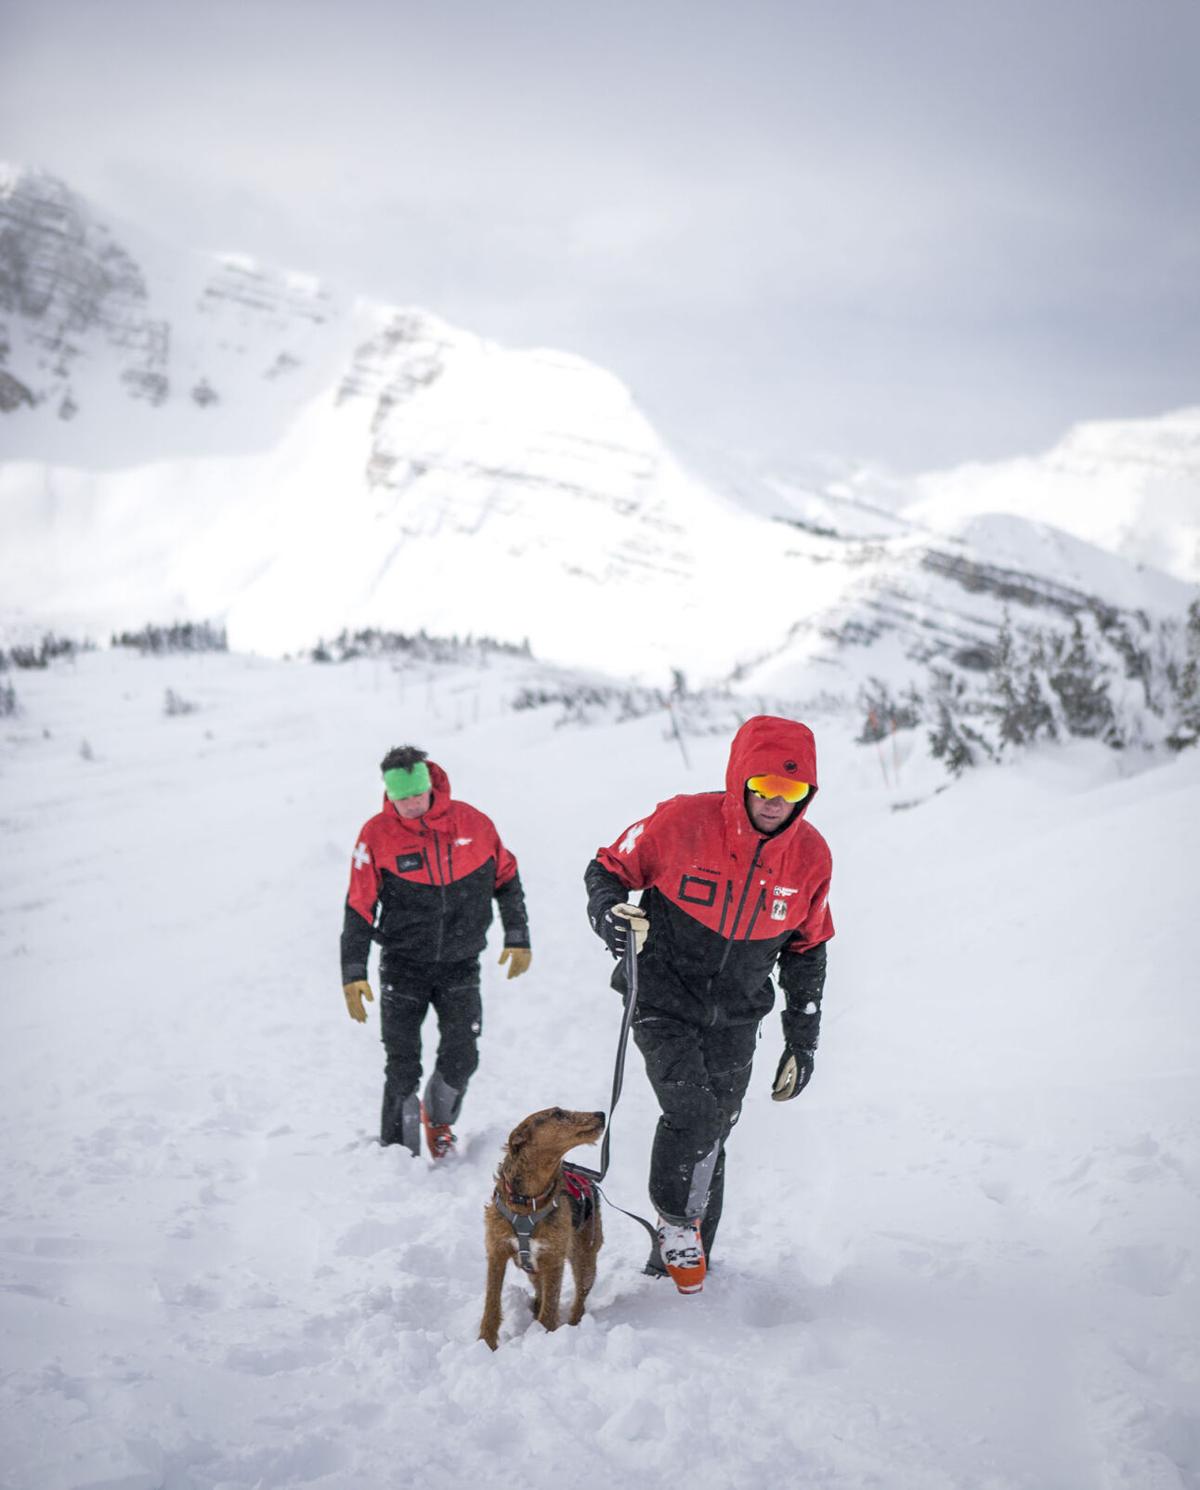 Meet the avalanche dogs who save skiers' lives